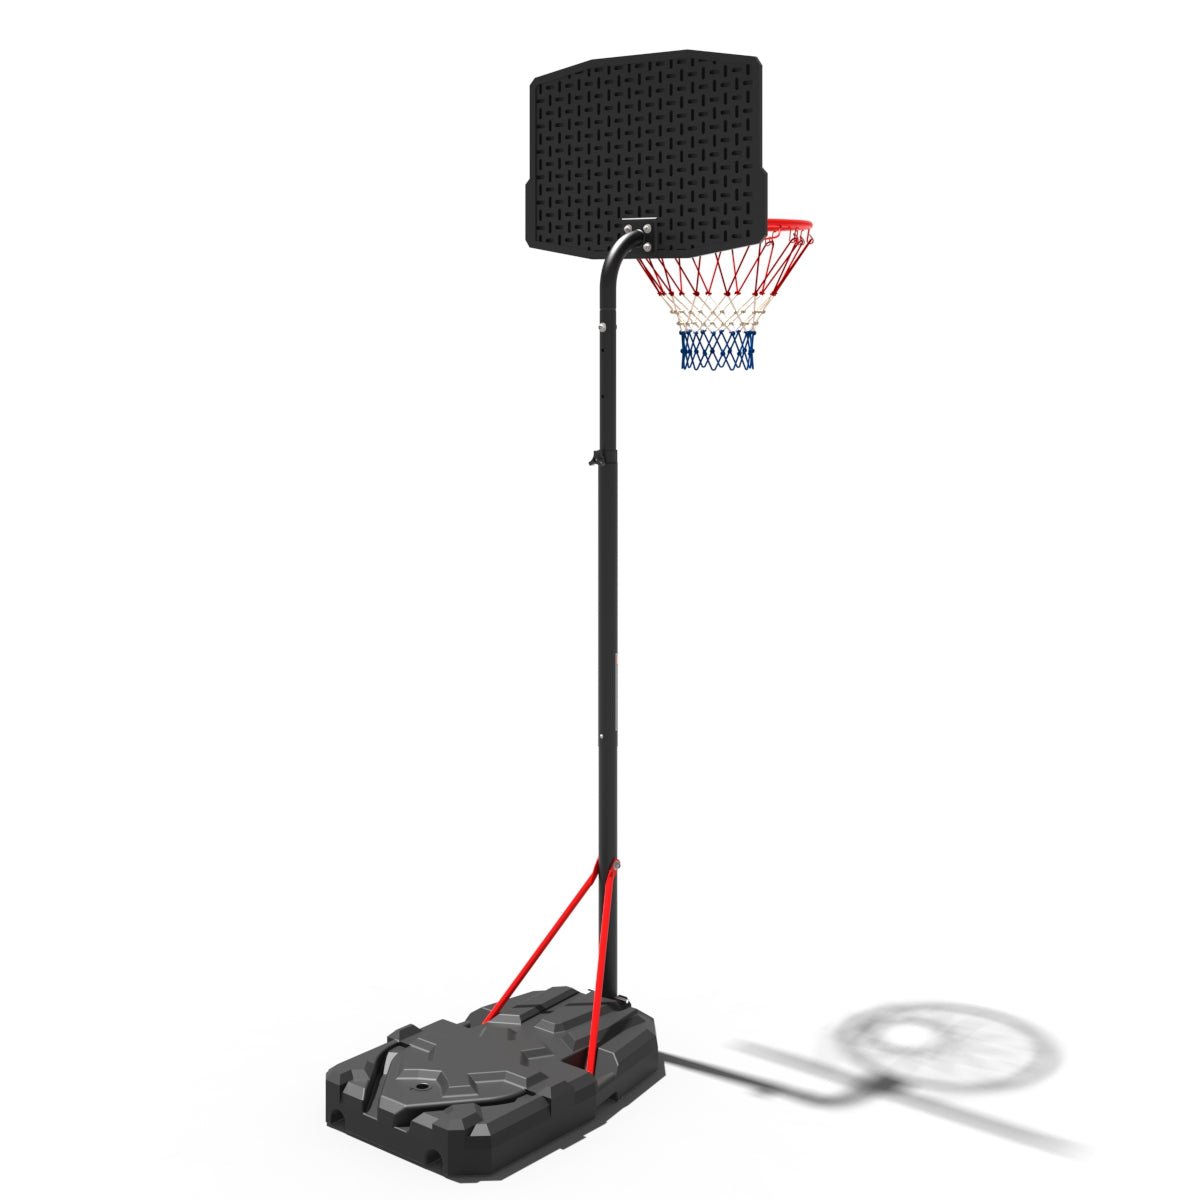 Rebo Freestanding Portable Basketball Hoop with Stand Adjustable Height - Small